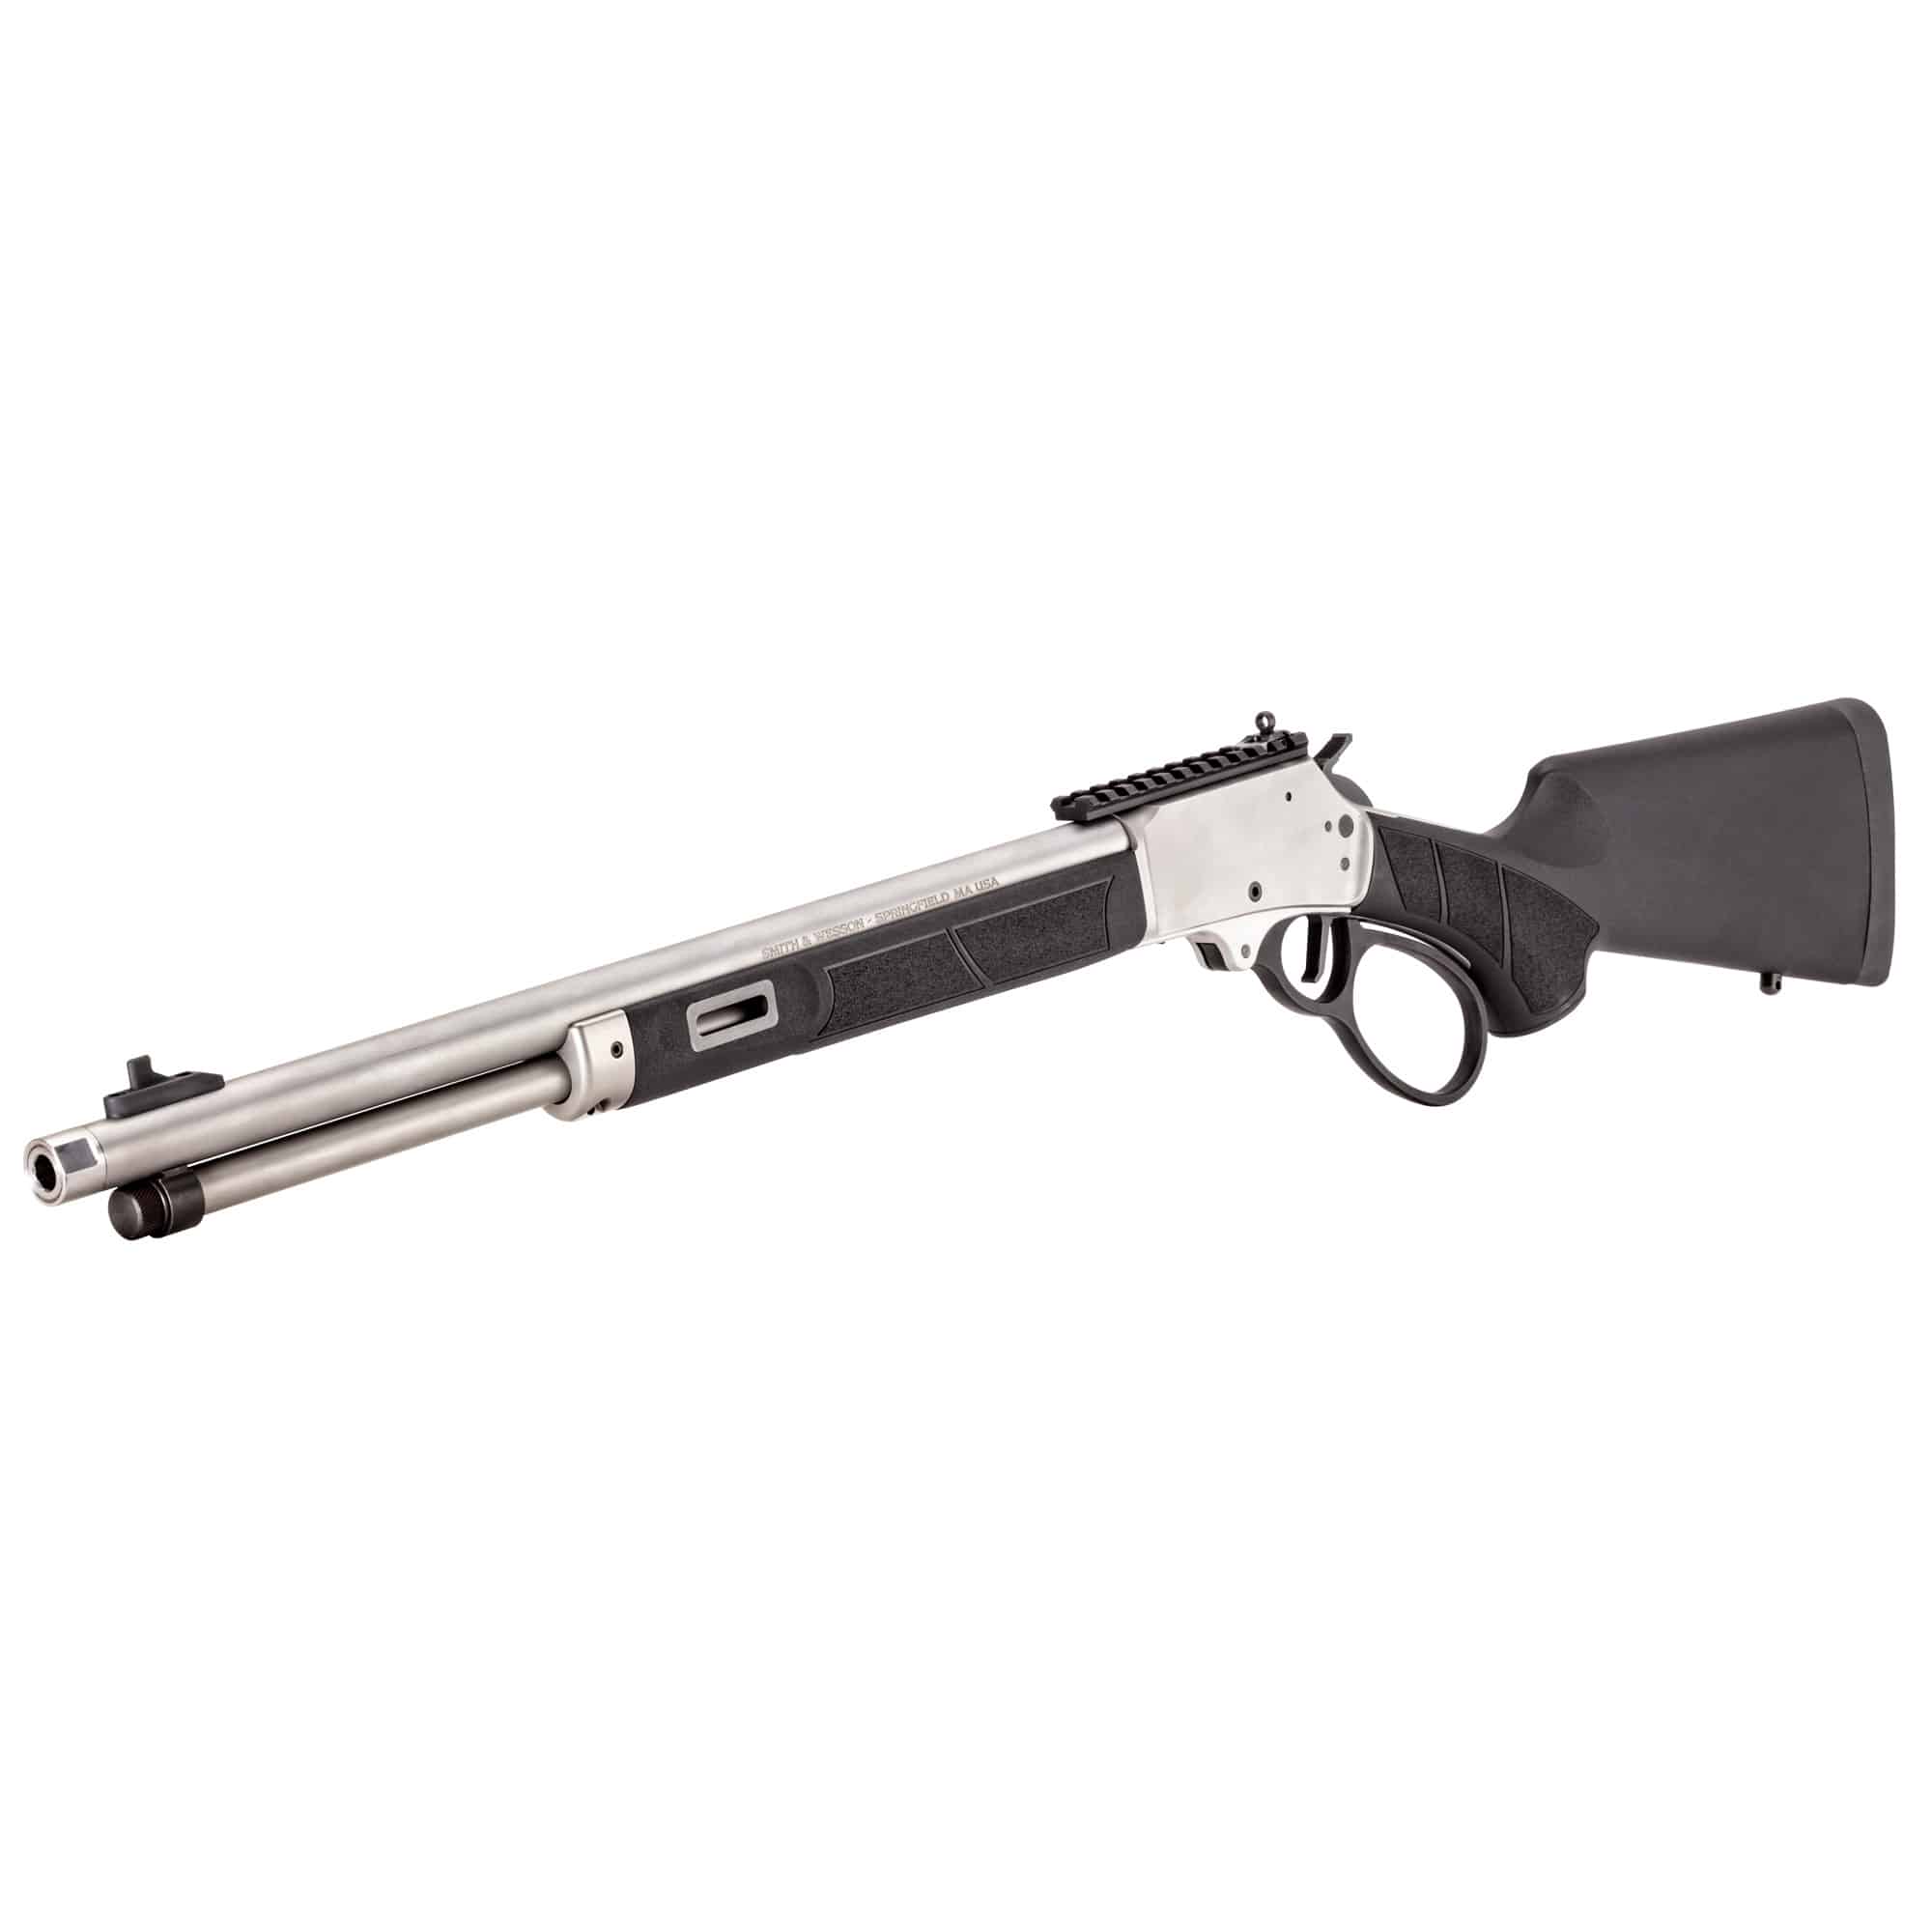 https://cityarsenal.com/product/smith-wesson-1854-lever-action-rifle-44-magnum-19-25-threaded-barrel-11-16-24-thread-pitch-stainless-steel-13812/